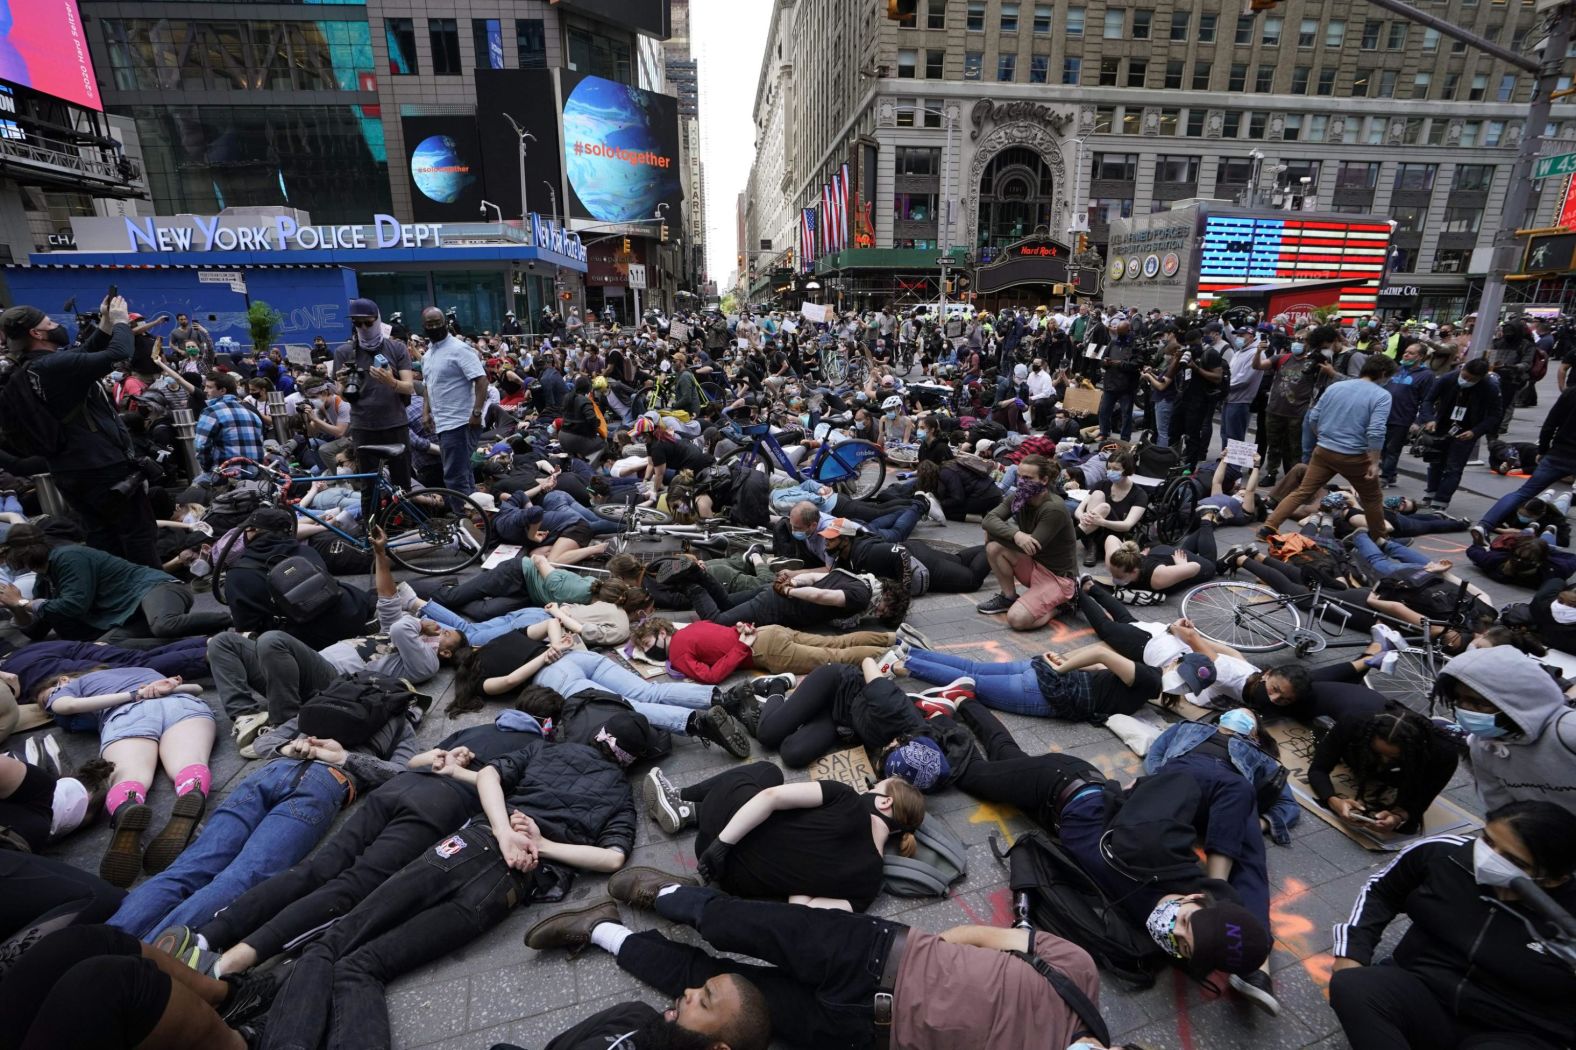 Protesters lie on the ground with their hands behind their back in New York's Times Square on Monday.